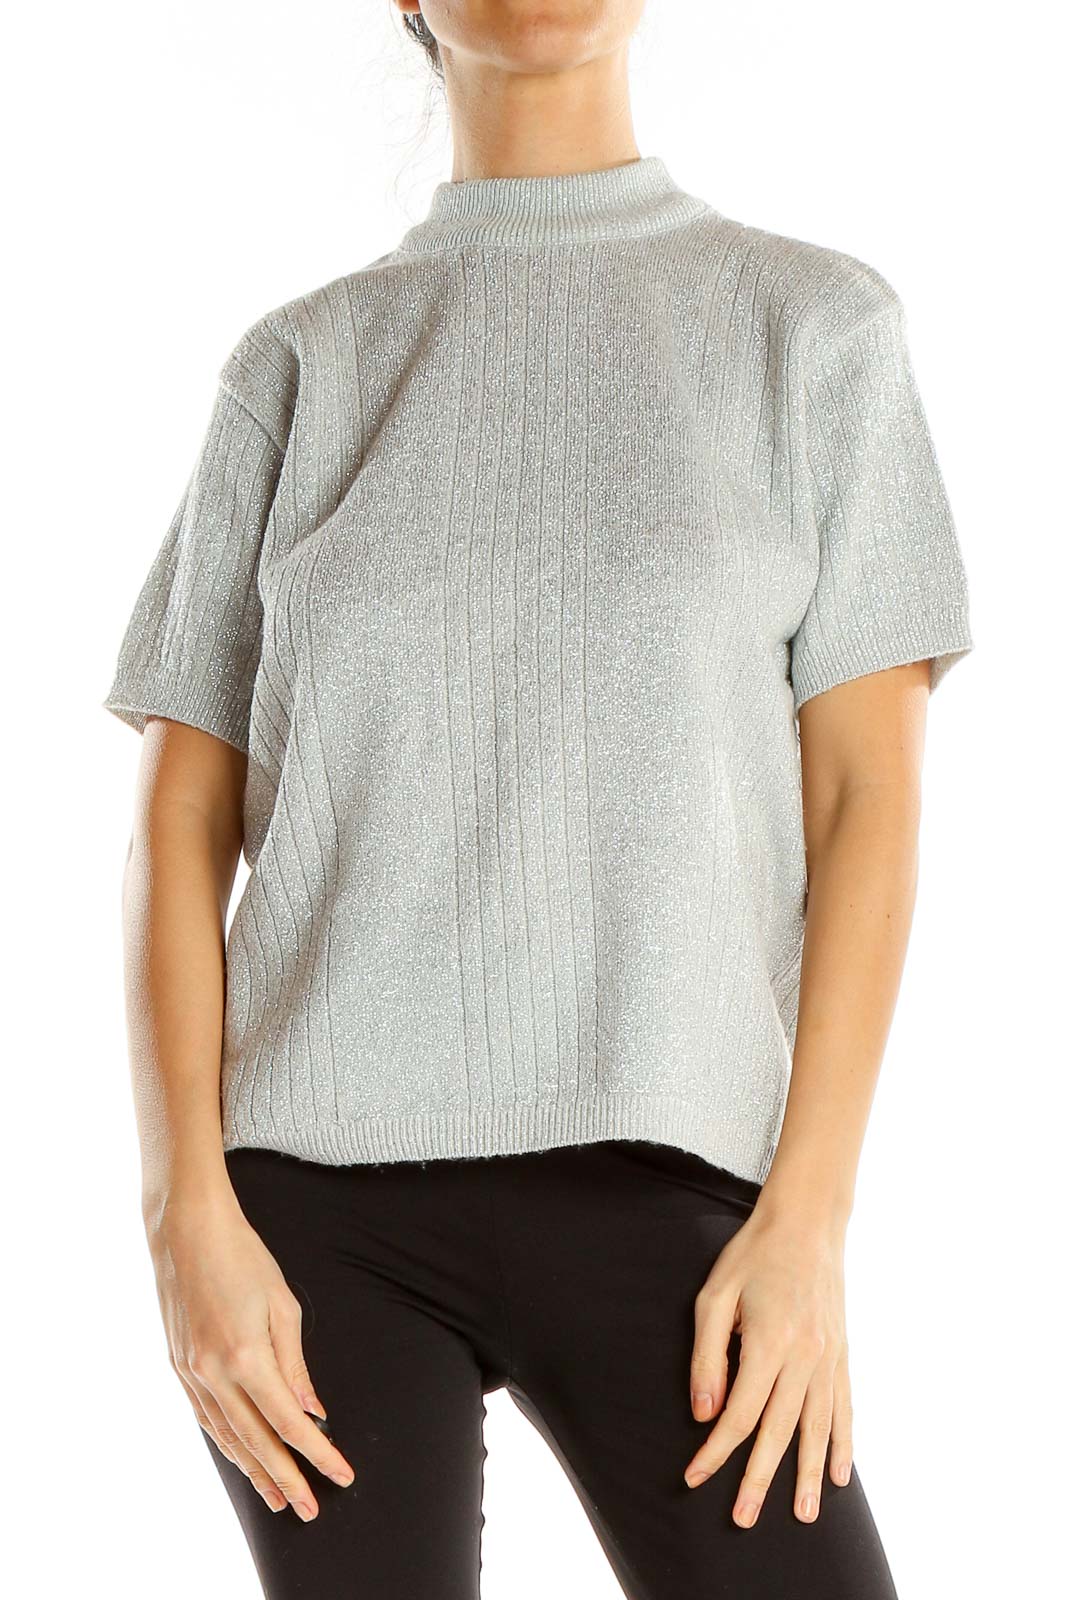 Gray Shimmer Woven Casual Top Front